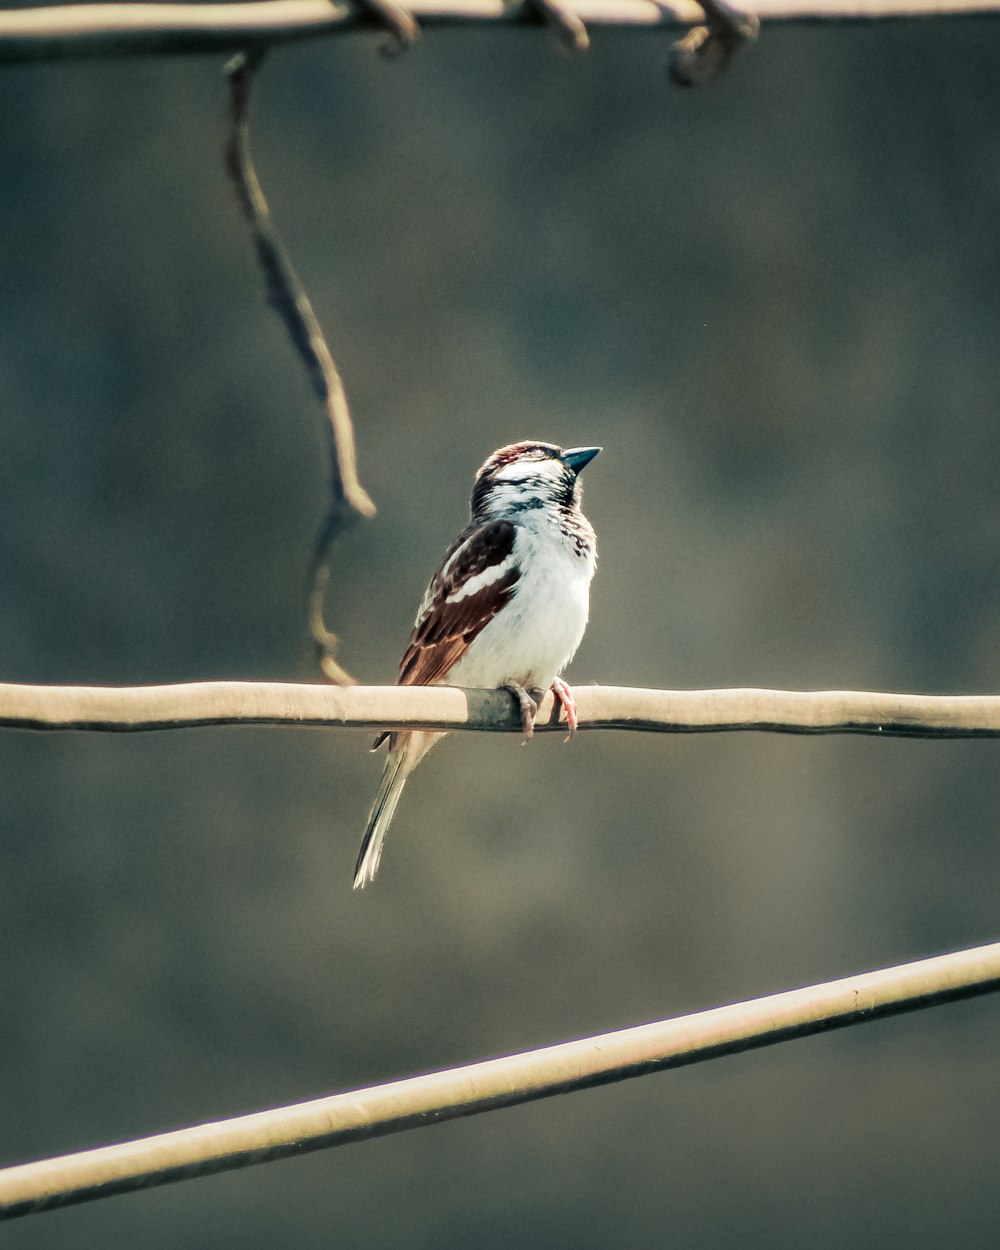 a small bird sitting on a wire with a blurry background